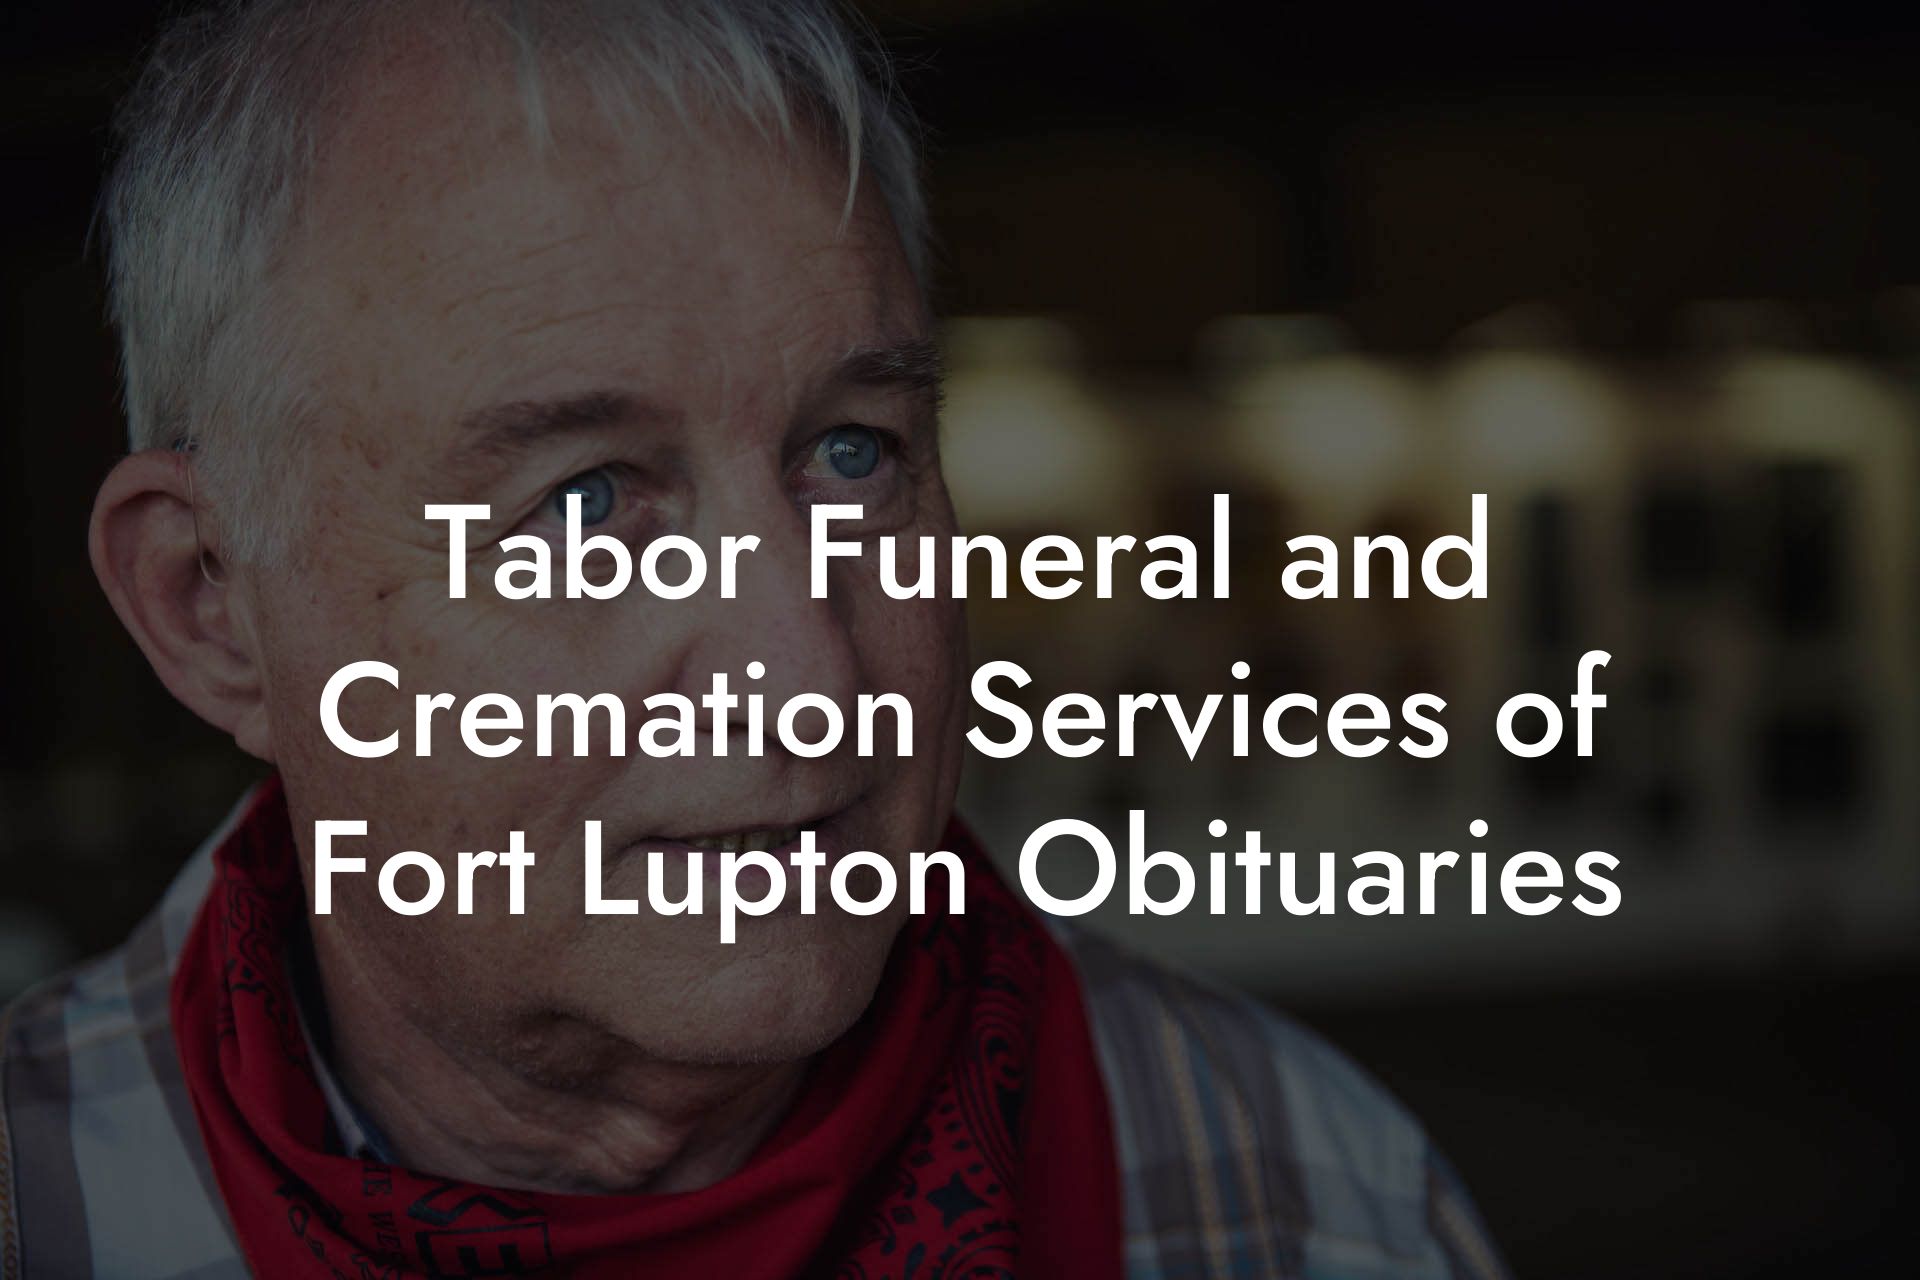 Tabor Funeral and Cremation Services of Fort Lupton Obituaries